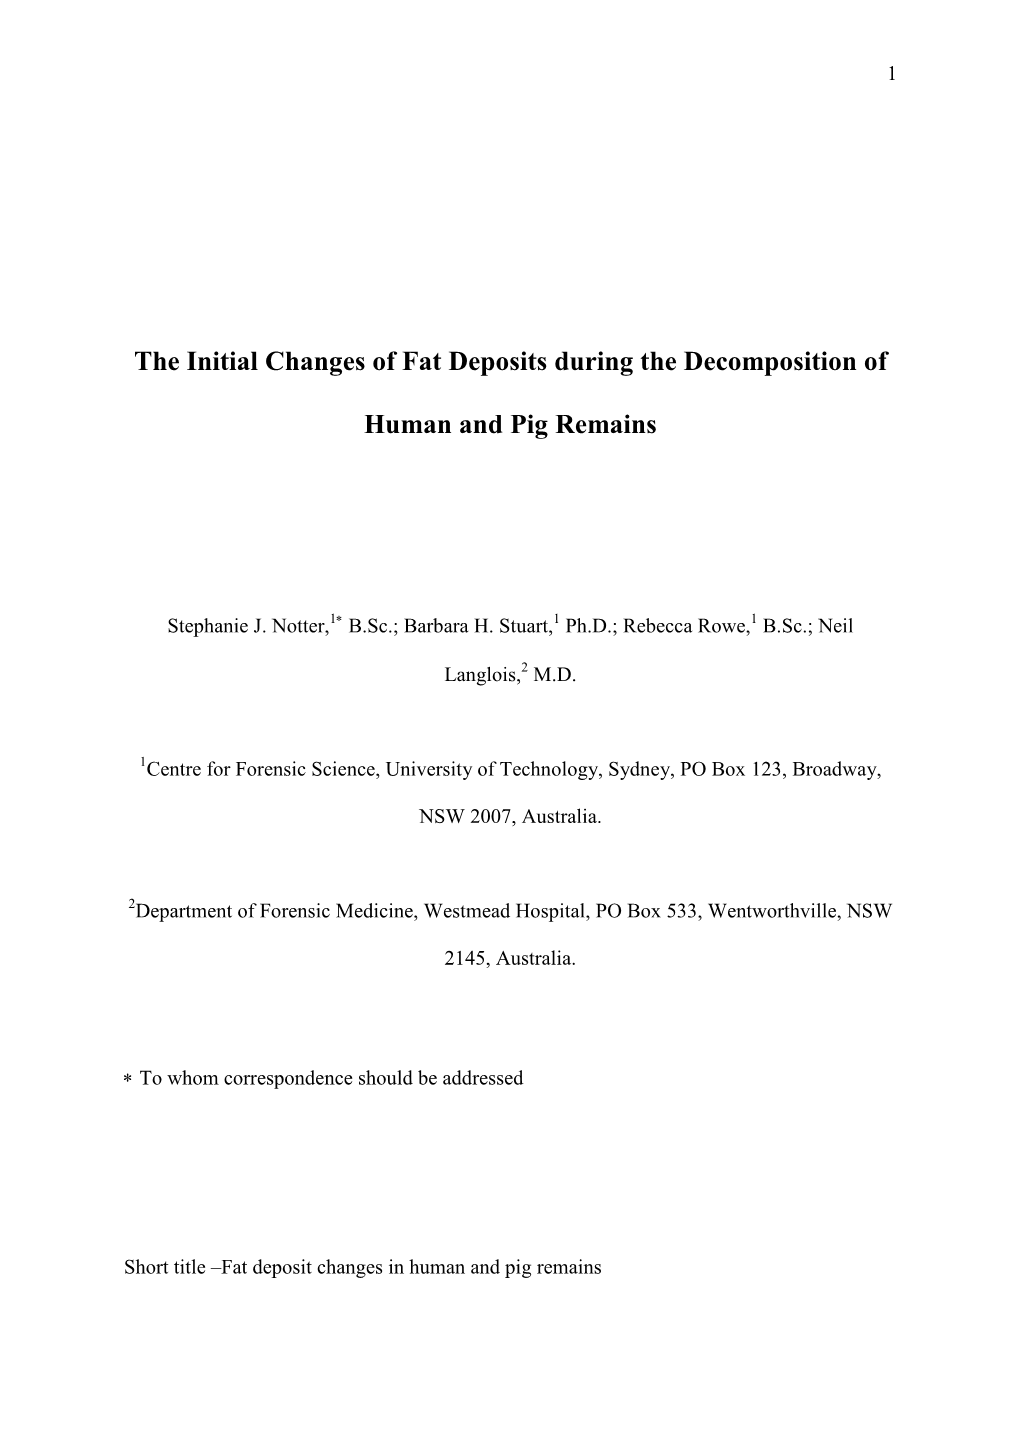 A Preliminary Comparison of Human and Pig Lipid Decomposition